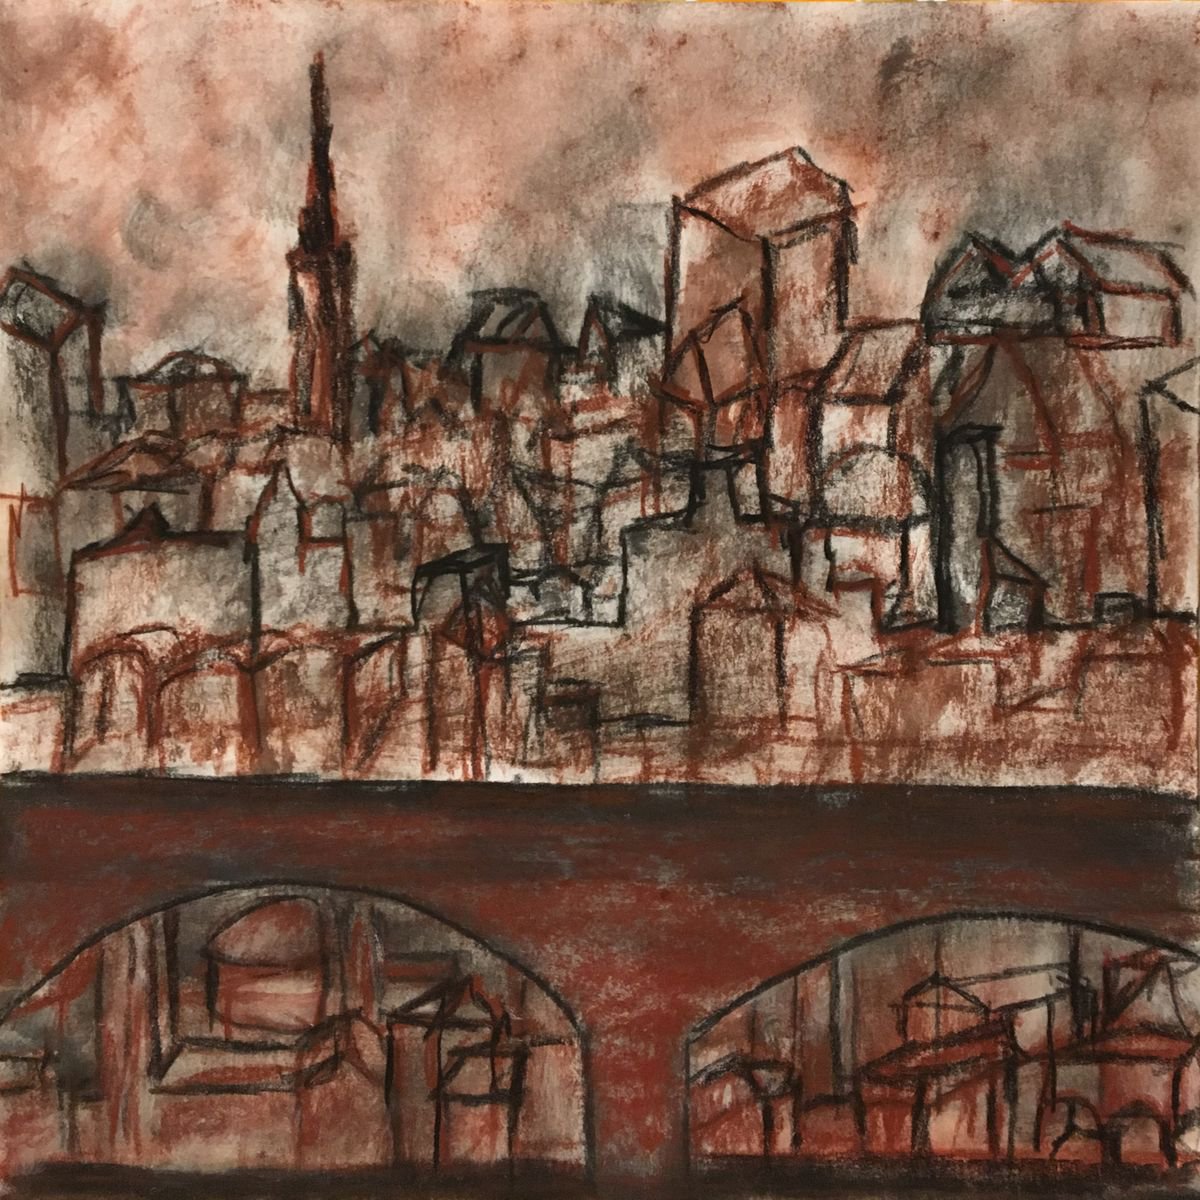 Town I (30x30 cm) by Paola Consonni